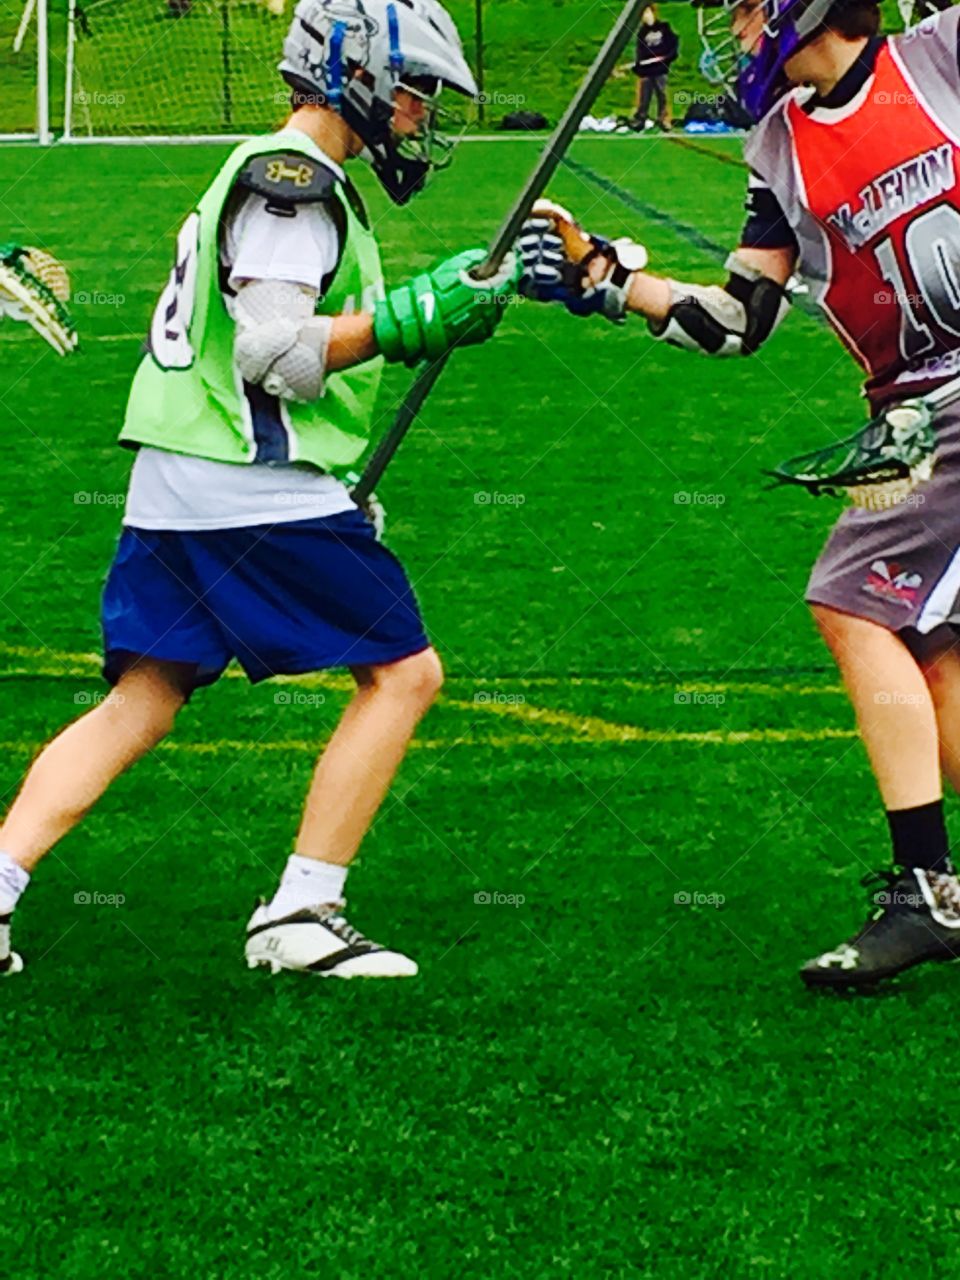 Youth boys lacrosse game